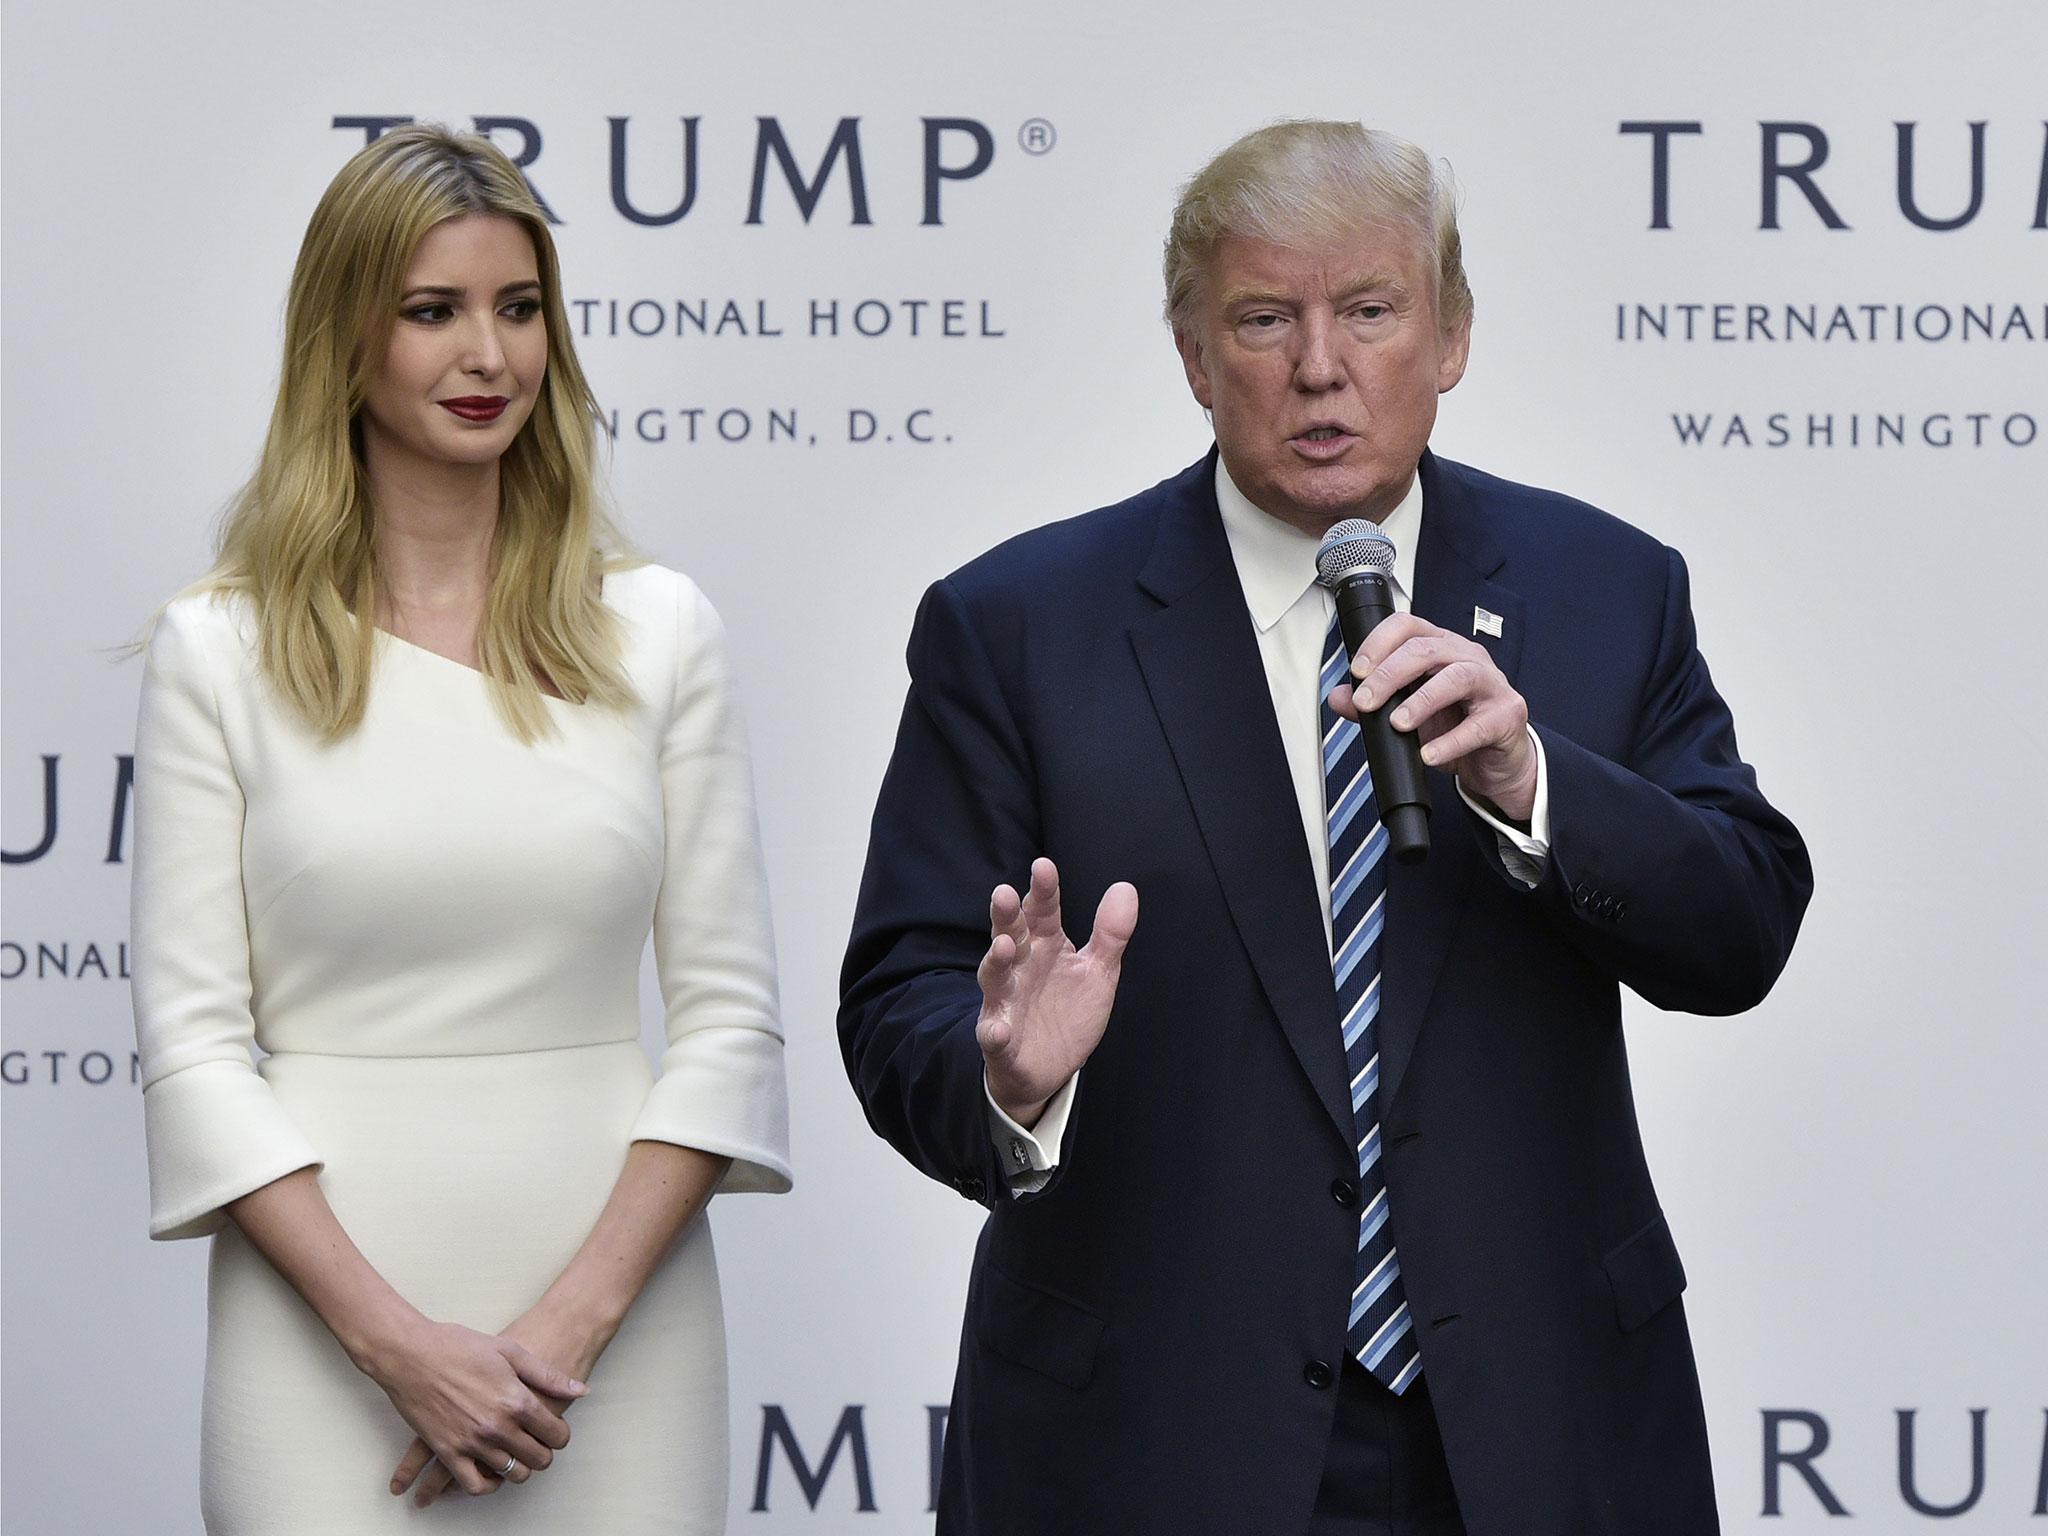 Donald Trump appears alongside his daughter Ivanka at a ribbon cutting ceremony at the grand opening of the Trump International Hotel in Washington, DC on 26 October, 2016